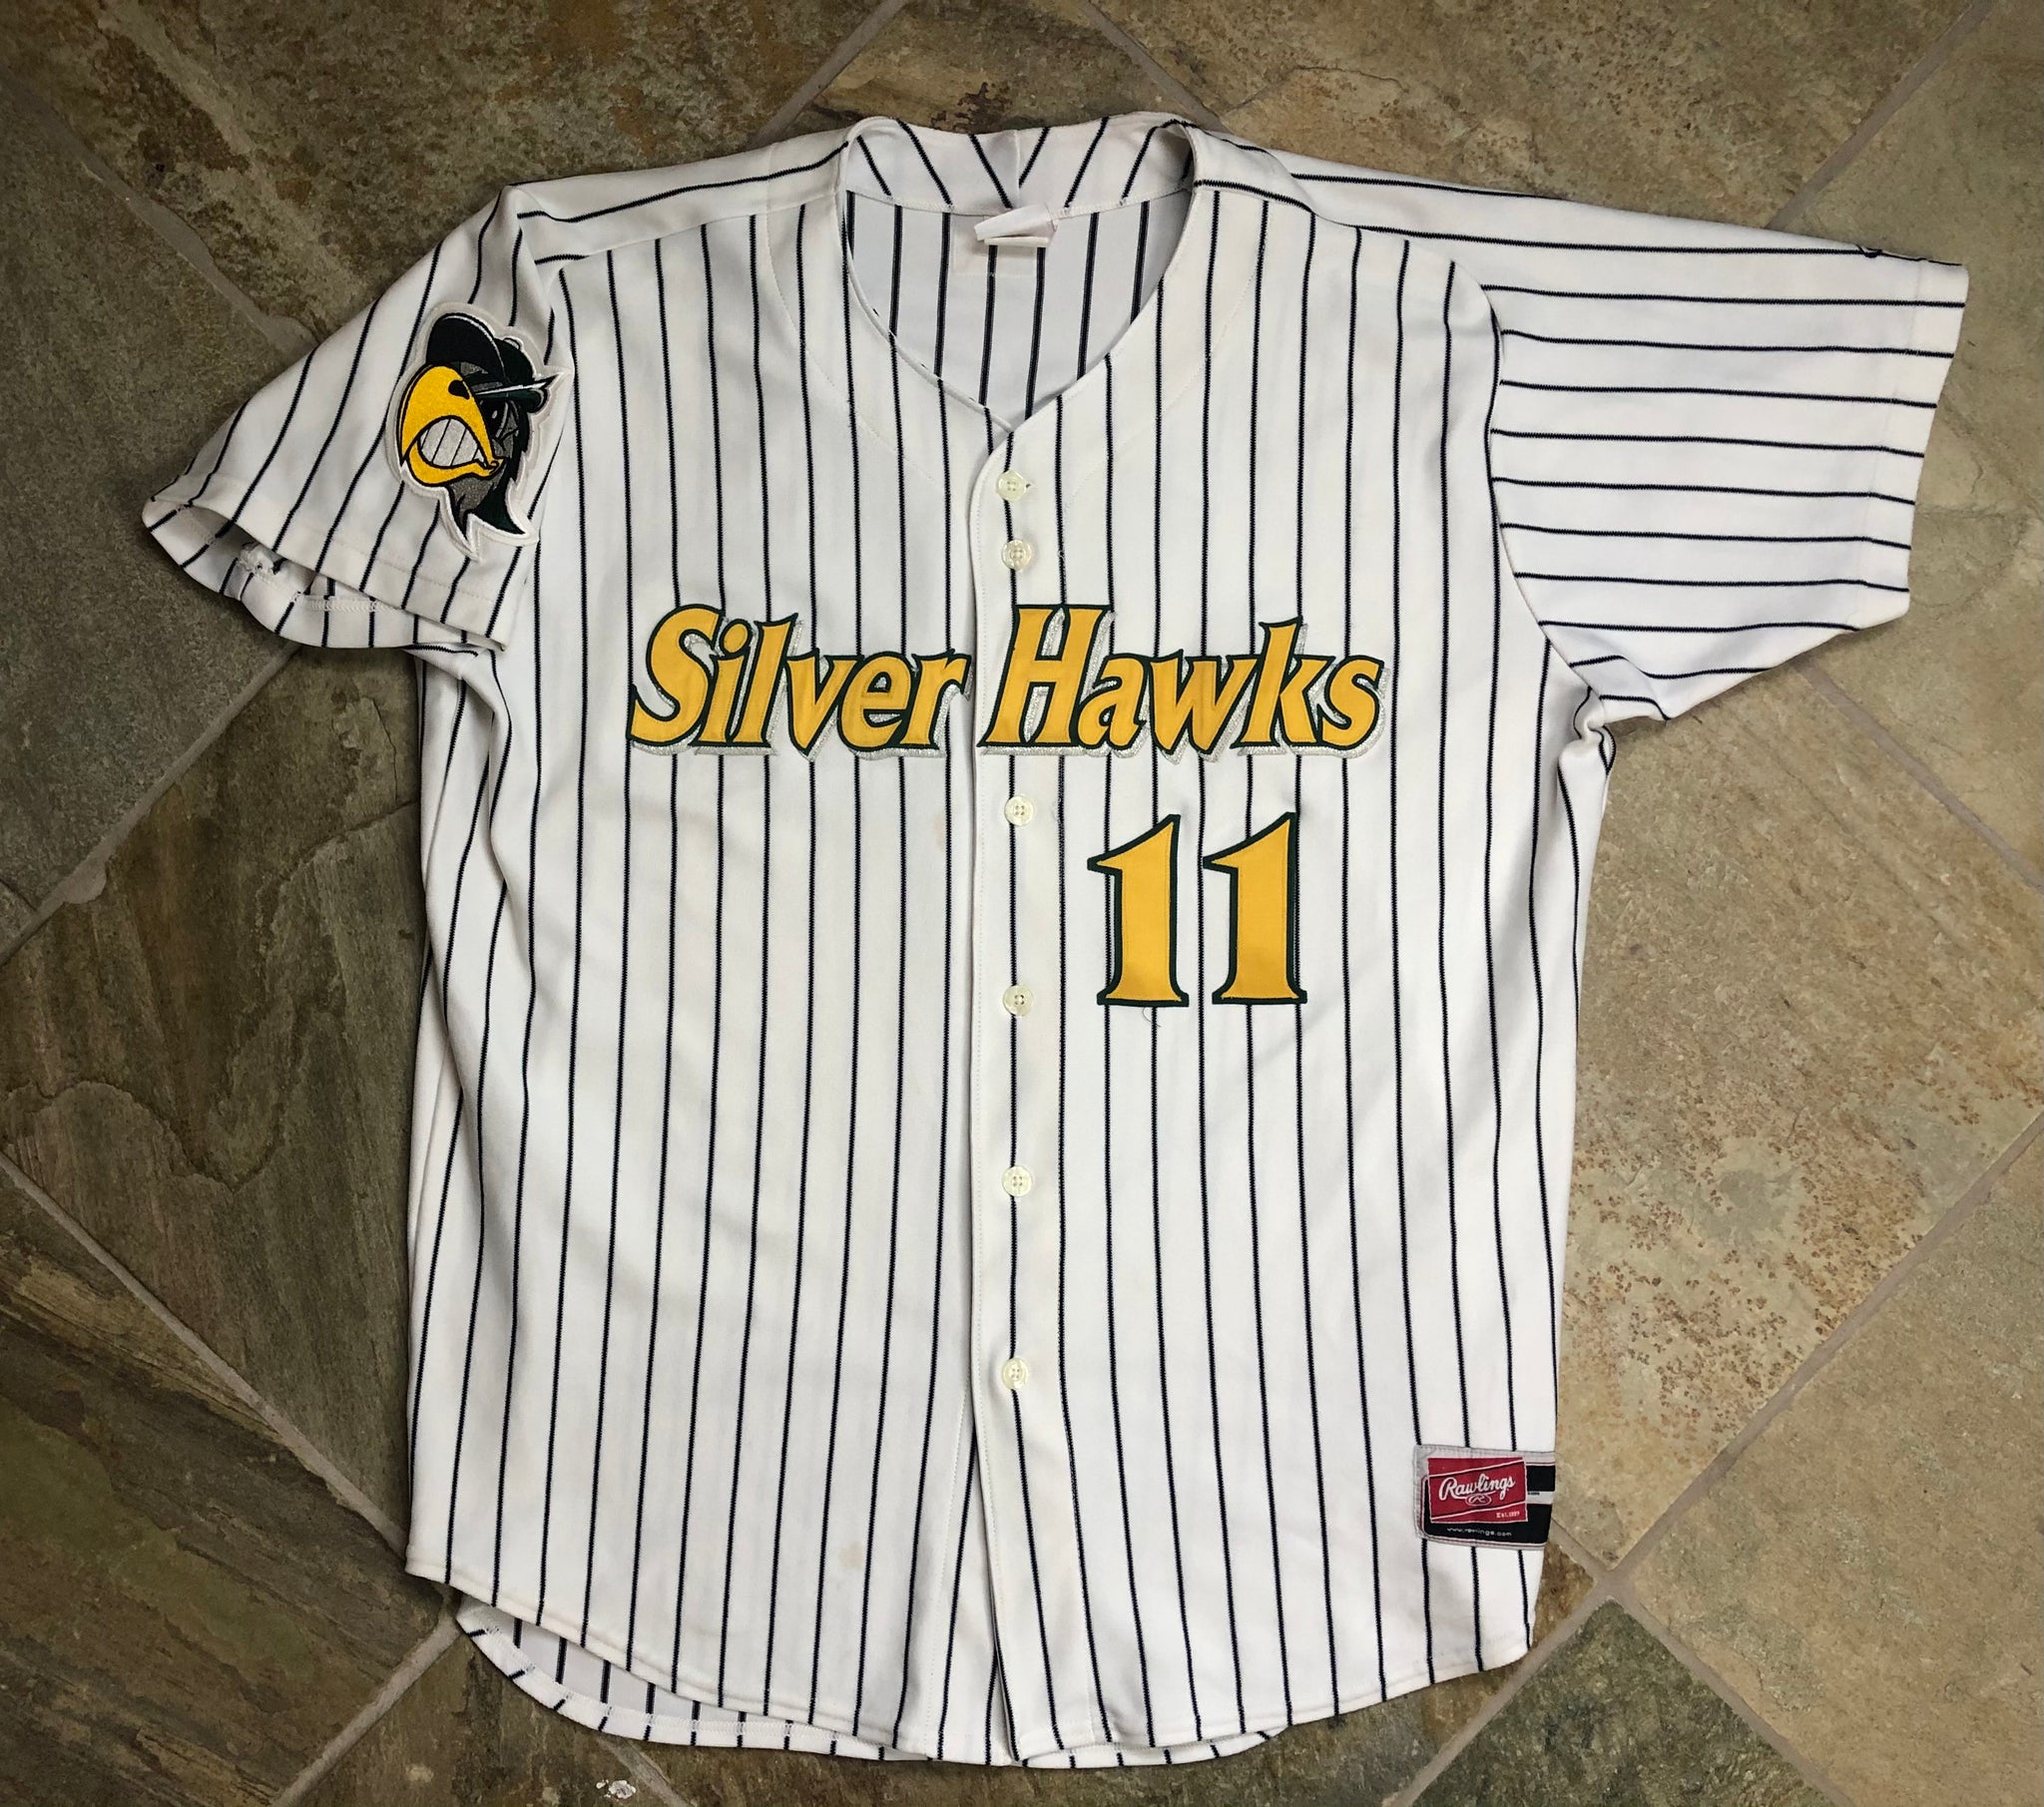 Wilson South Bend Silver Hawks Authentic Game Worn Throwback Jersey LG (46) #15